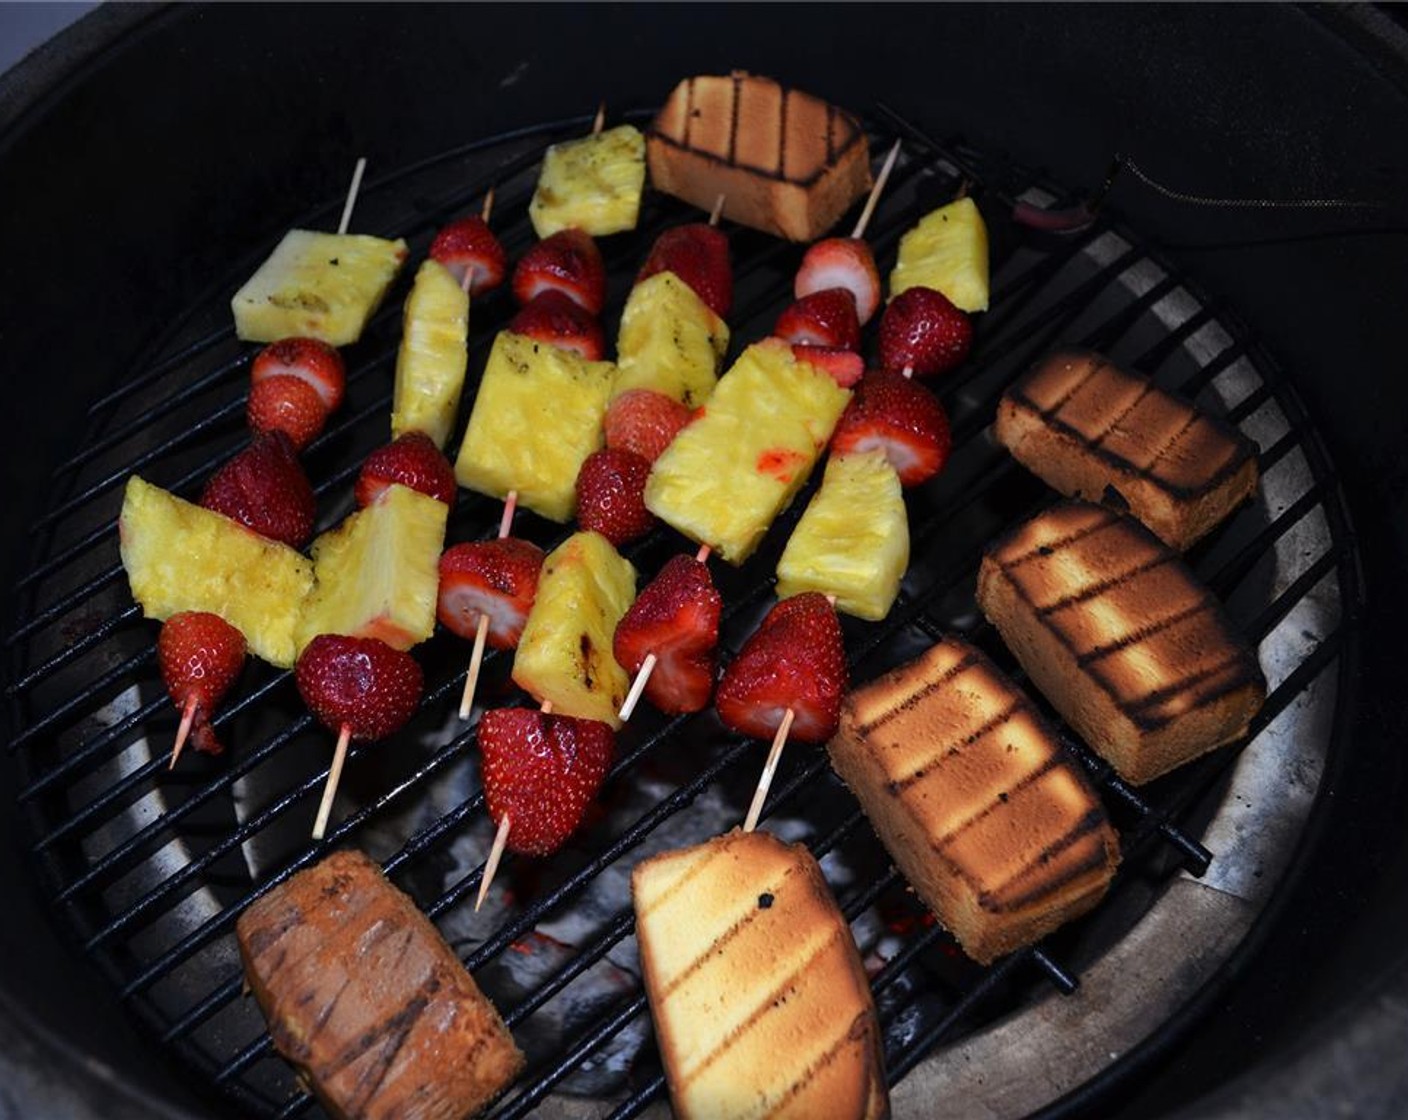 step 2 Place the skewers and pound cake diagonally on the grill grate and cook until grill marks appear. Flip and repeat.